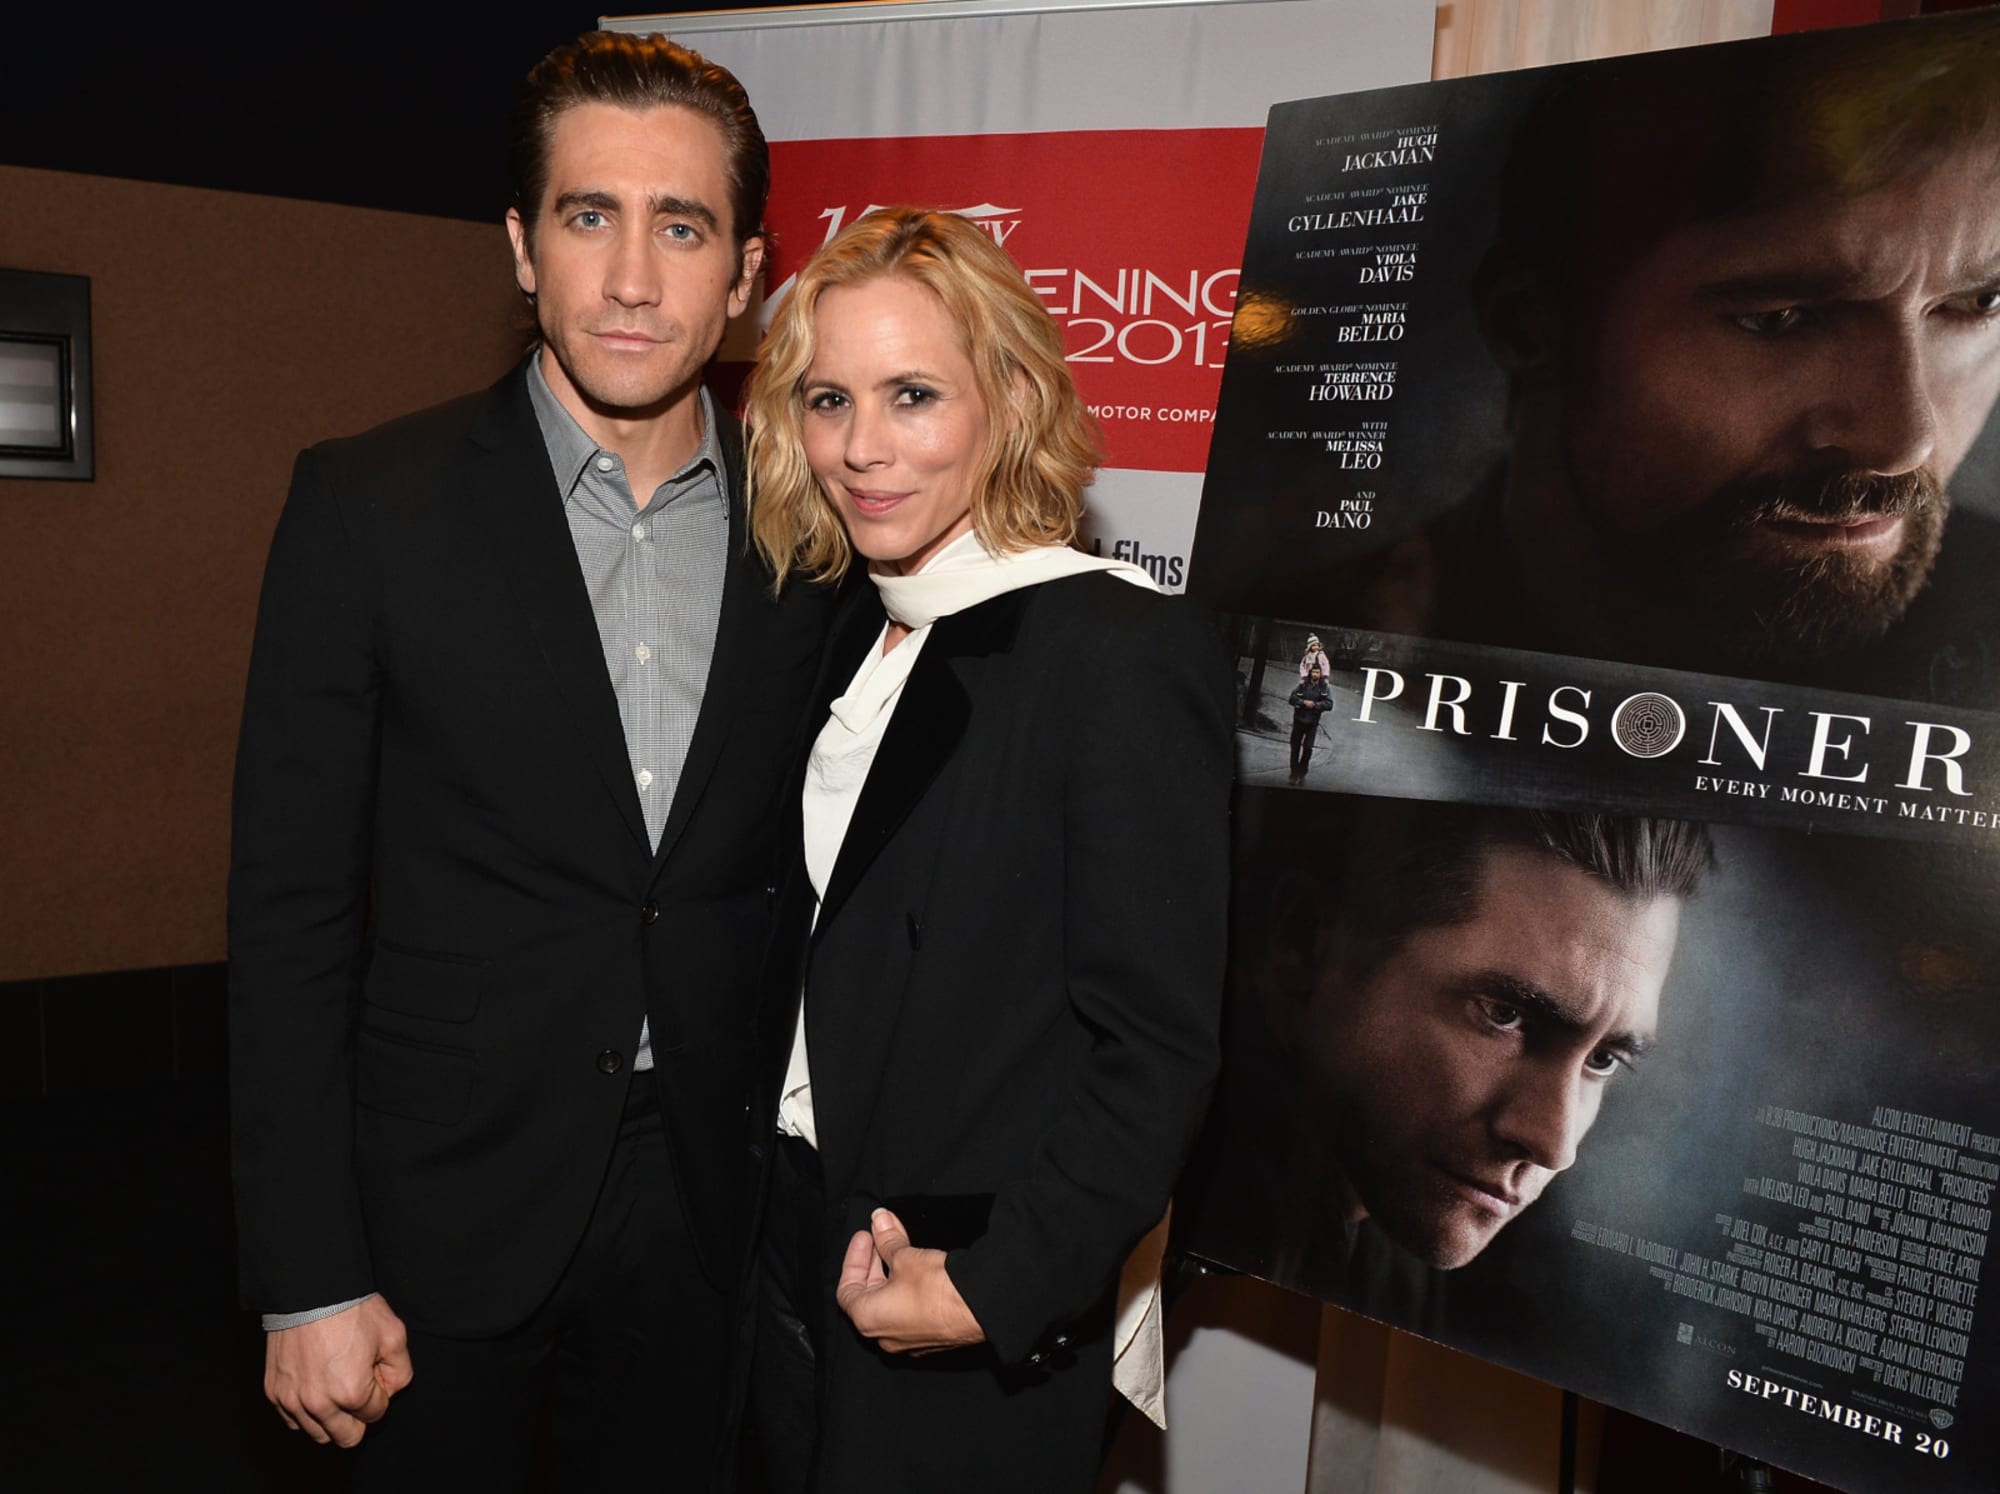 What is Jake Gyllenhaal’s thriller Prisoners about?

+2023